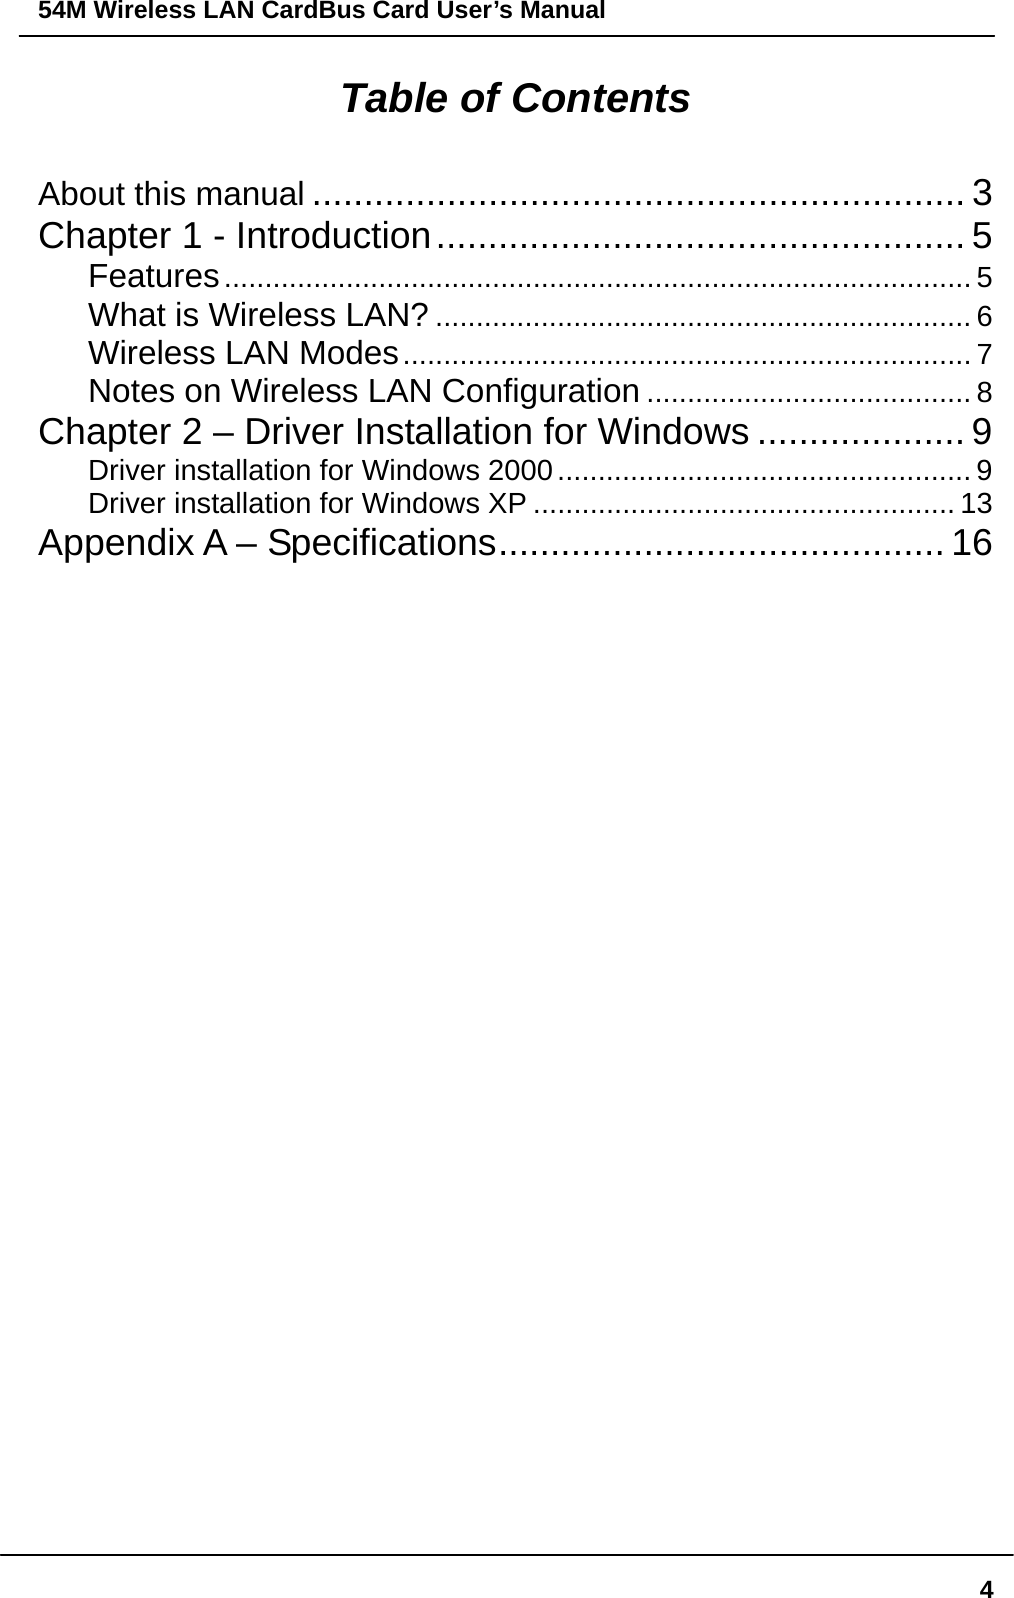 54M Wireless LAN CardBus Card User’s Manual  4Table of Contents About this manual ............................................................... 3 Chapter 1 - Introduction................................................... 5 Features............................................................................................ 5 What is Wireless LAN? .................................................................. 6 Wireless LAN Modes...................................................................... 7 Notes on Wireless LAN Configuration ........................................ 8 Chapter 2 – Driver Installation for Windows .................... 9 Driver installation for Windows 2000................................................... 9 Driver installation for Windows XP .................................................... 13 Appendix A – Specifications........................................... 16                                   